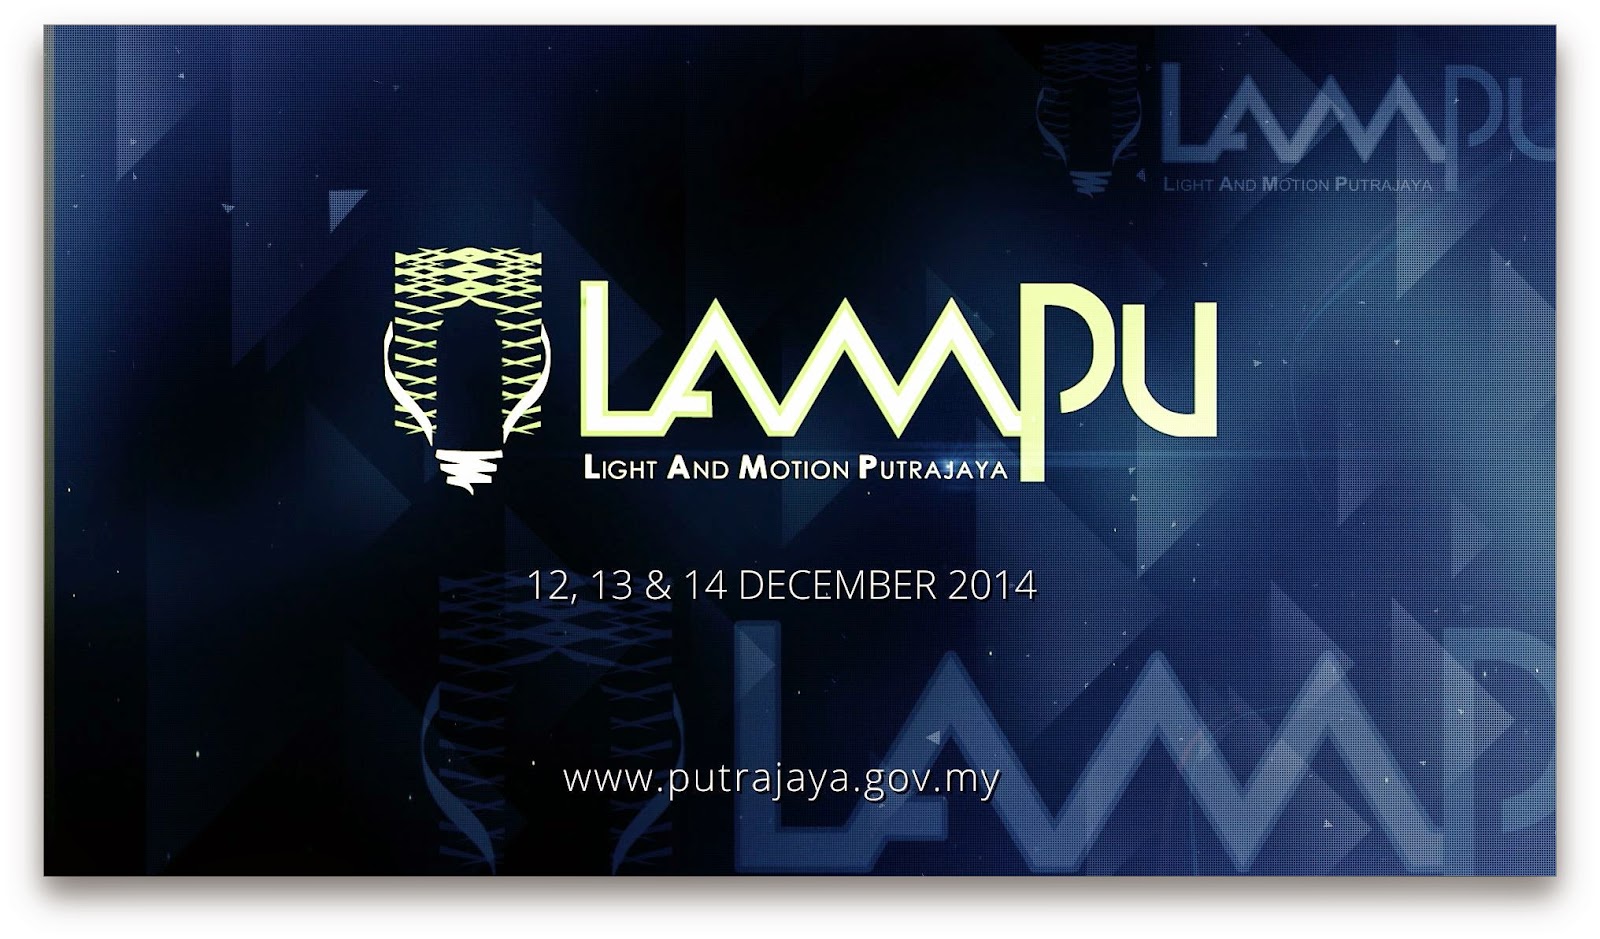 Light And Motion Festival (LAMPU) 2014